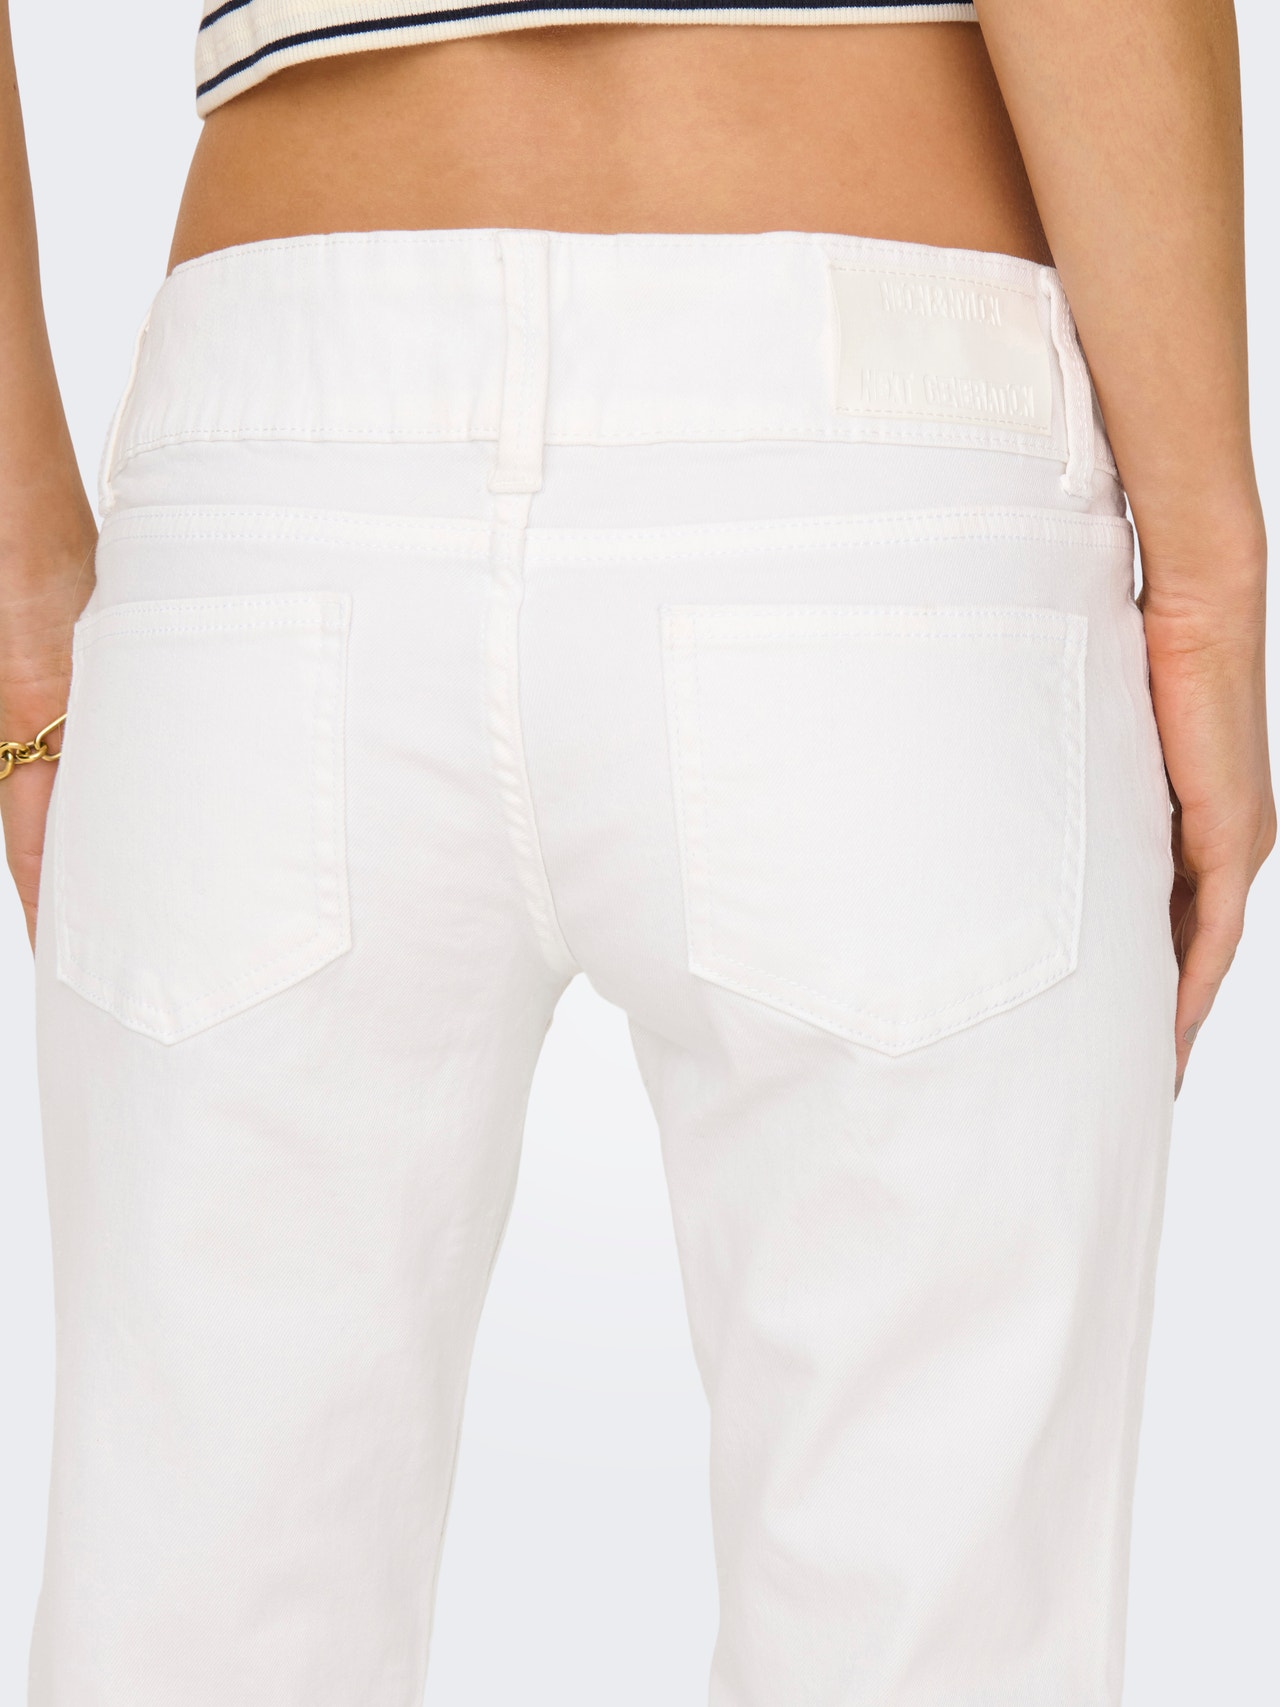 Flared Fit Super low waist Jeans with 20% discount!